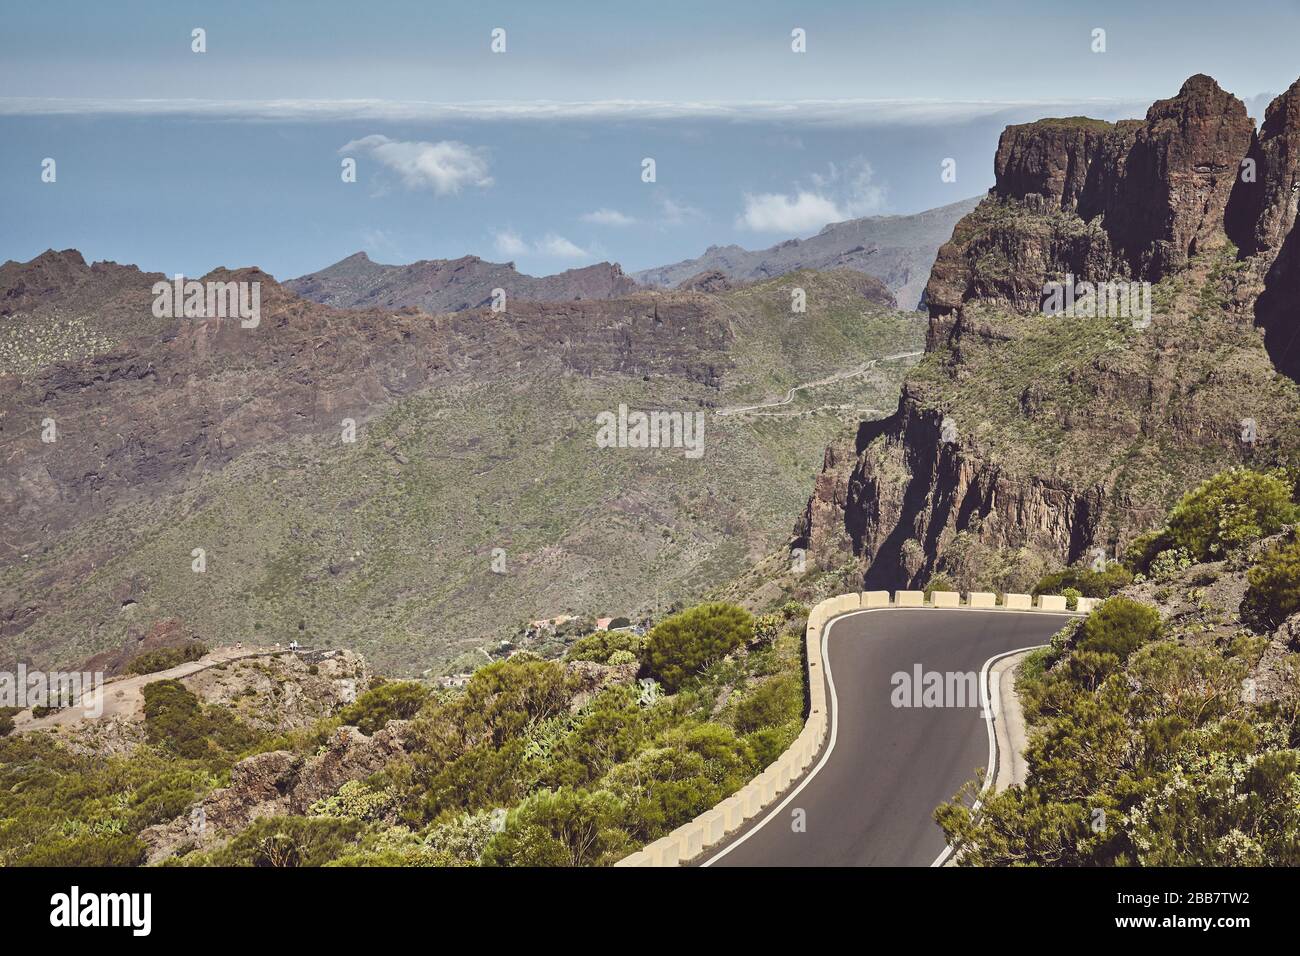 Tenerife mountain landscape, color toning applied, Spain. Stock Photo